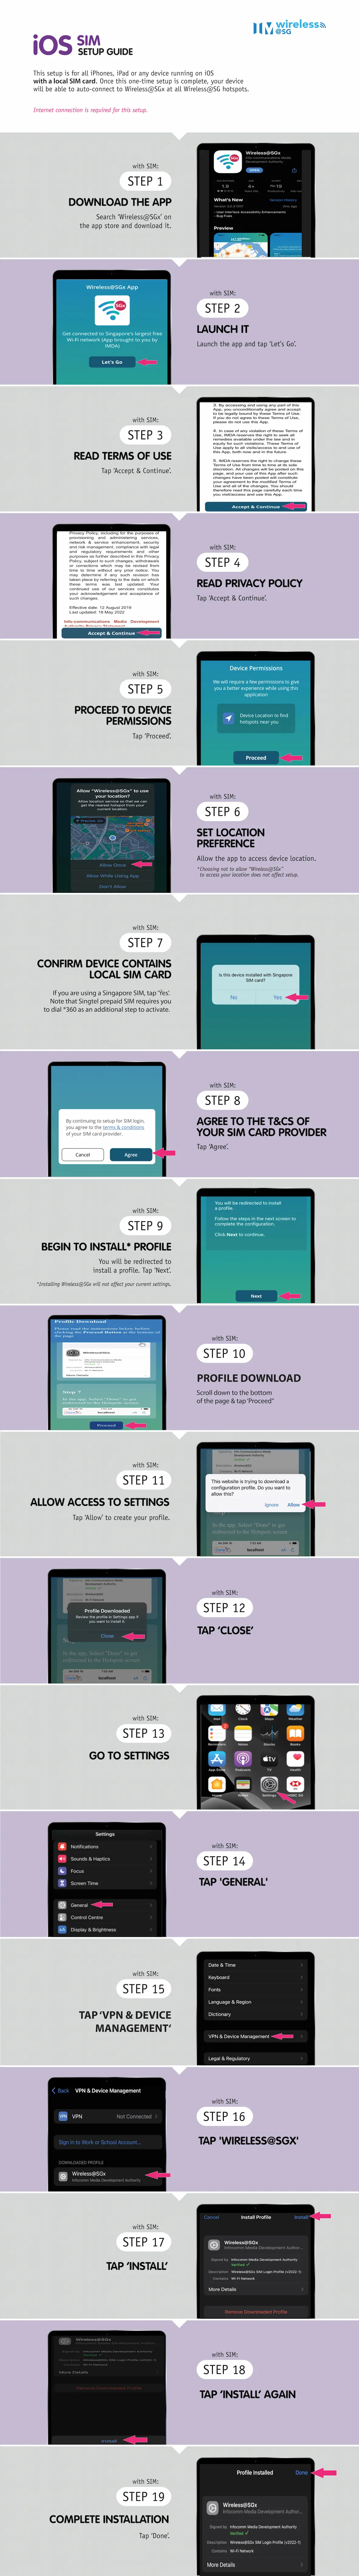 Wireless@SGx app step-by-step infographic setup guide for iOS SIM